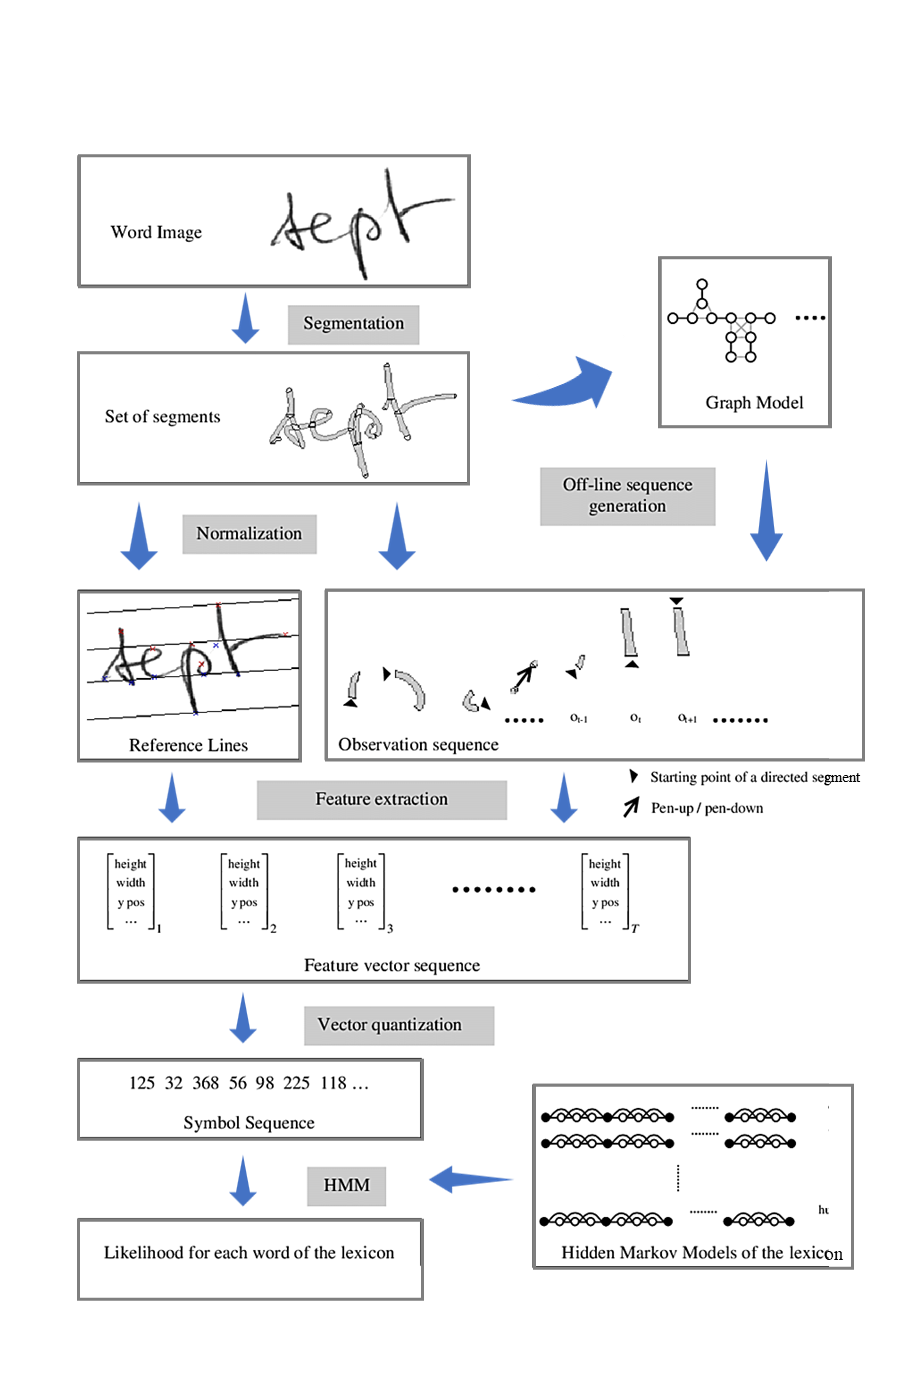 The internal process of an ocr system that scans handwritten text images 